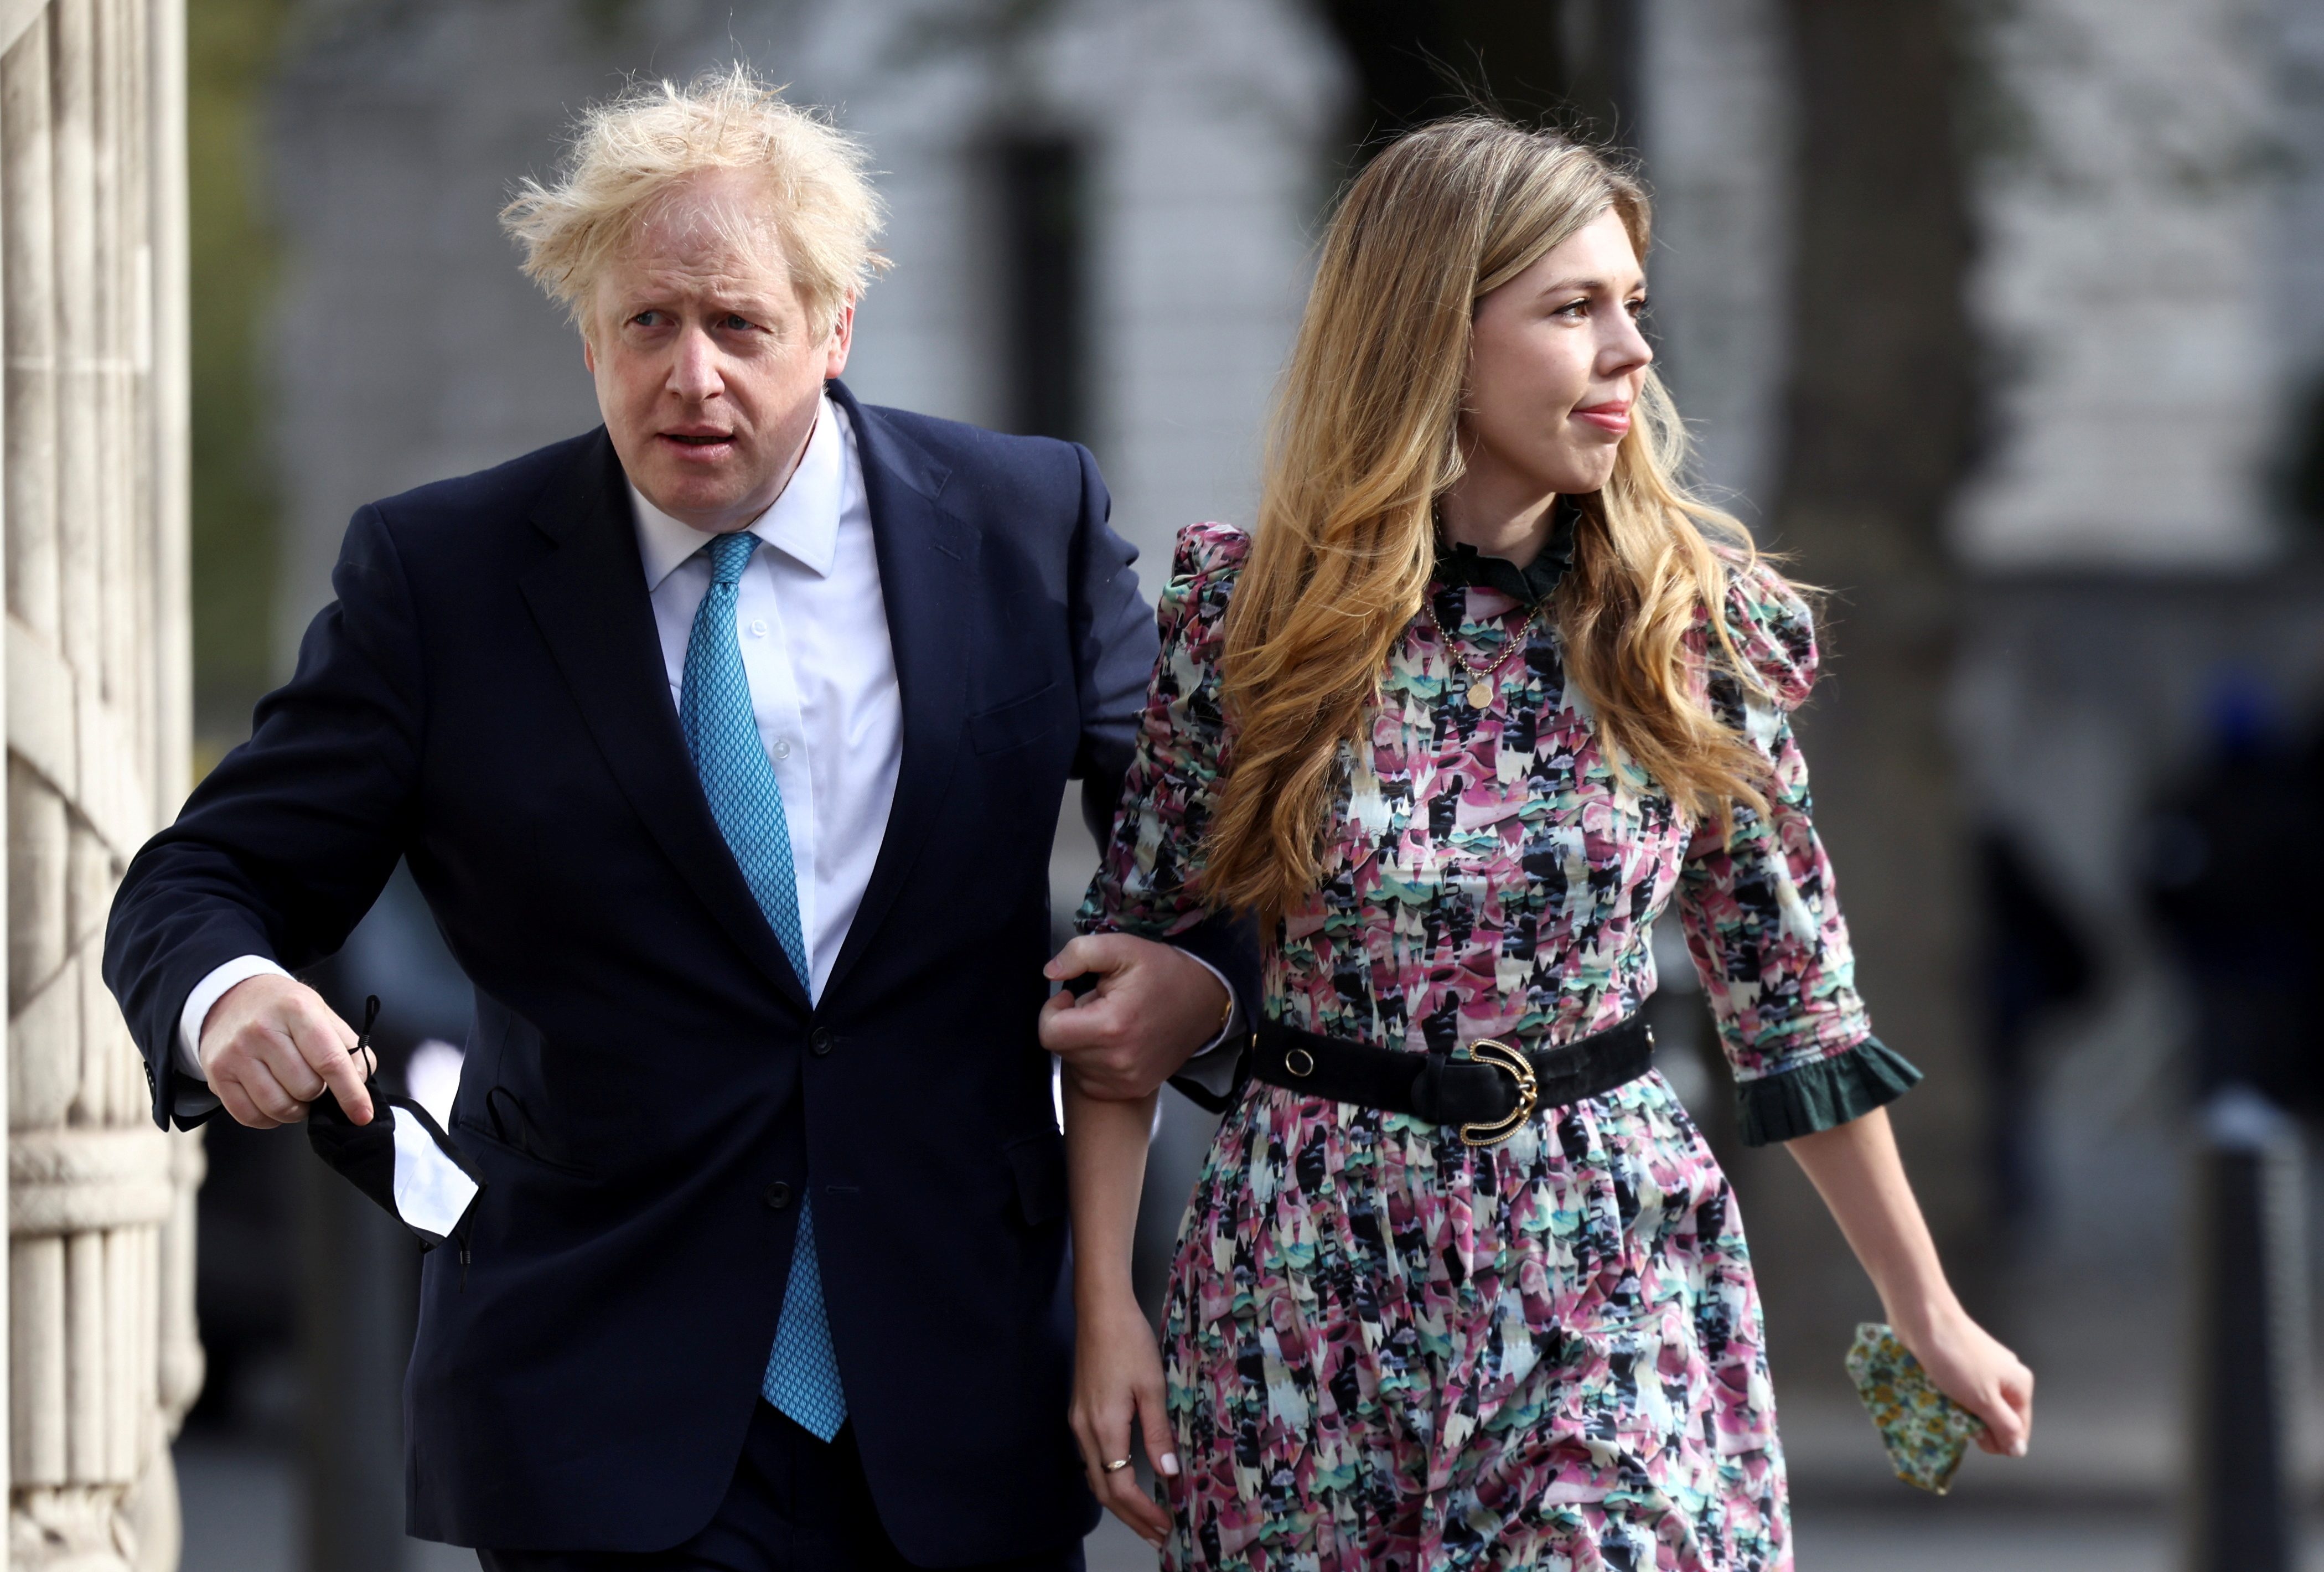 UK PM Johnson marries fiancé in secret ceremony – reports